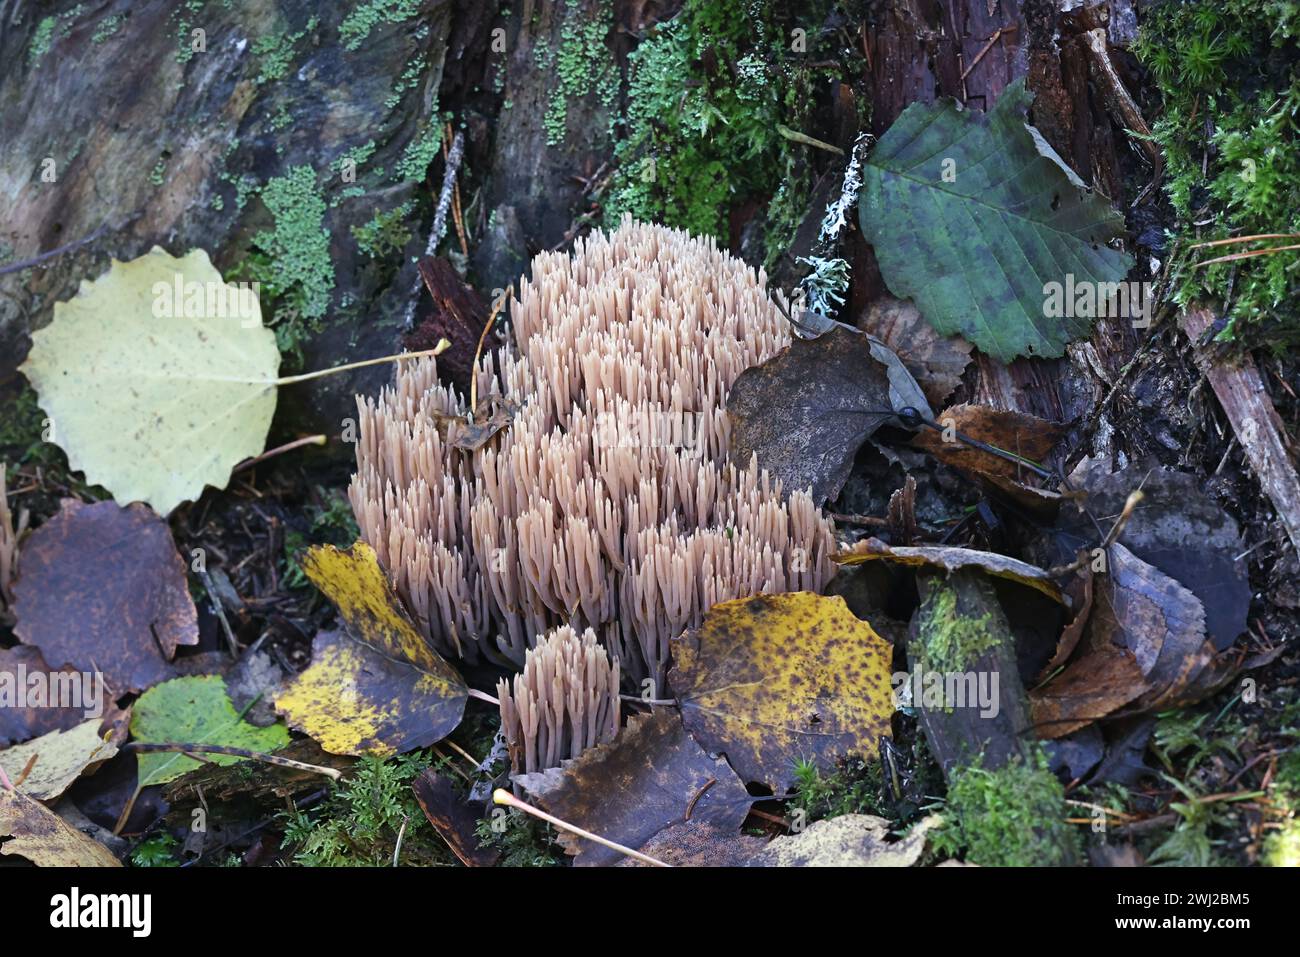 Ramaria concolor, also called Ramaria stricta var. concolor, coral fungus growing on spruce in Finland, no common English name Stock Photo